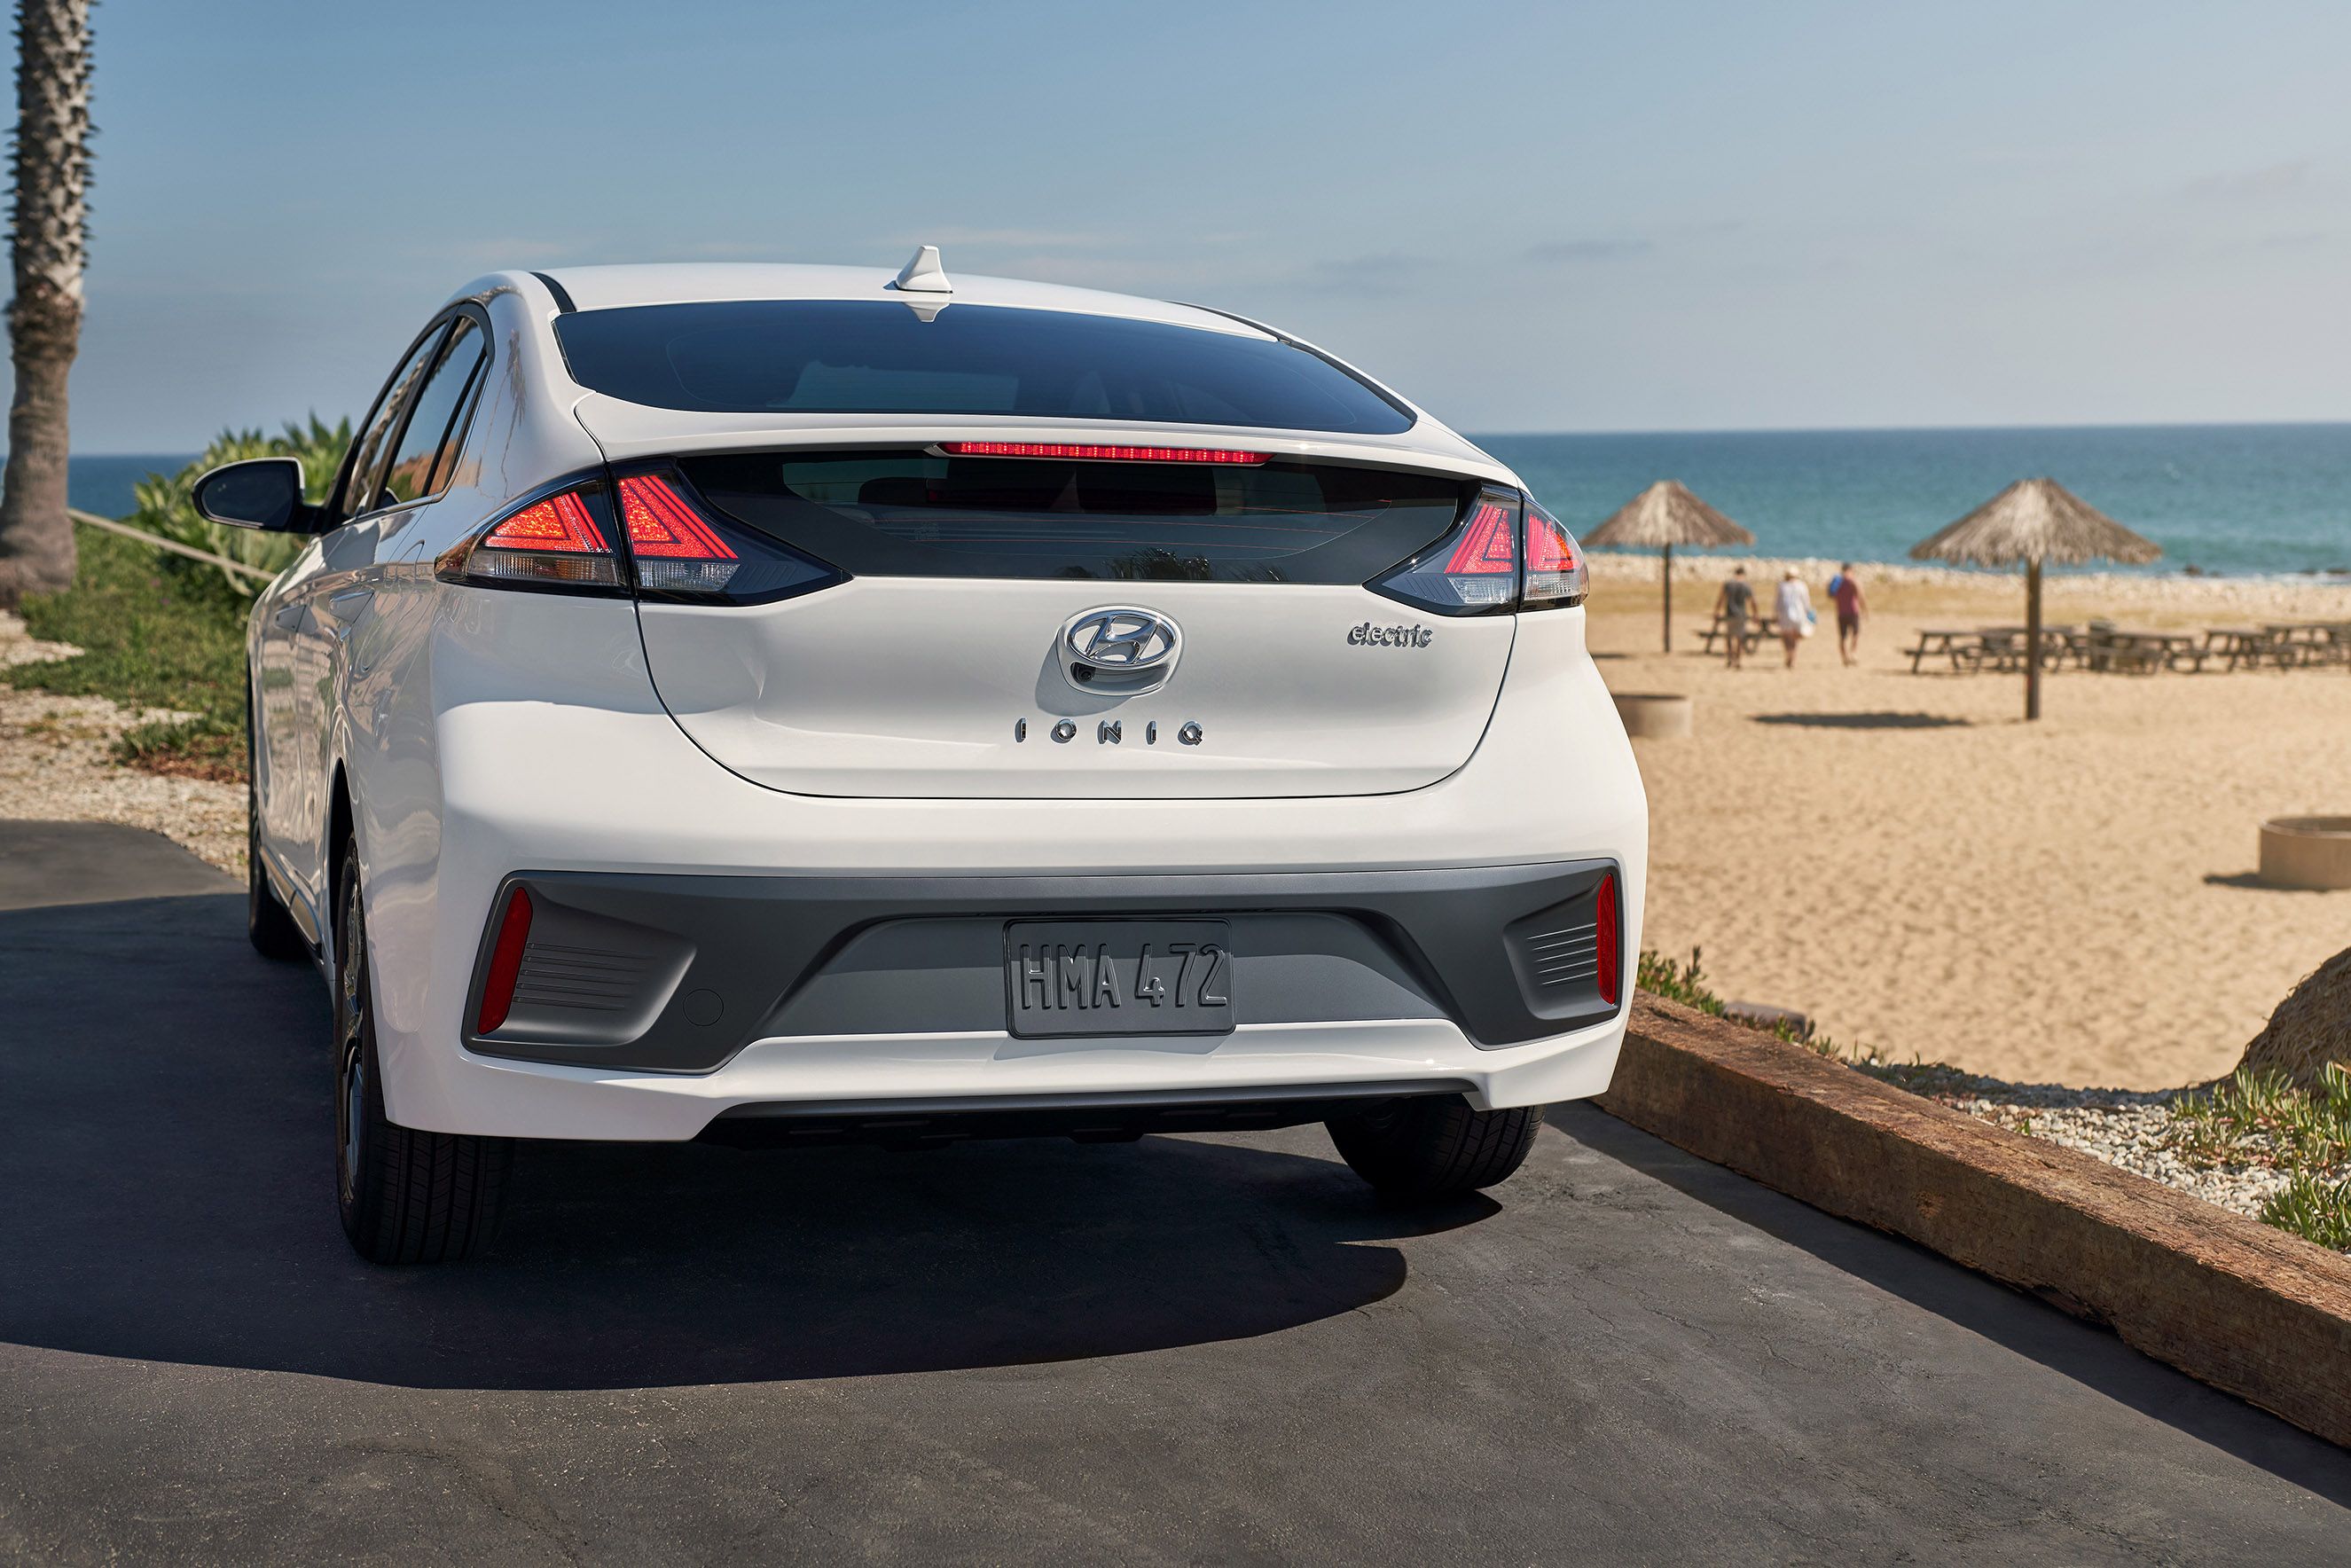 2021 Hyundai Electric Review, Pricing, and Specs